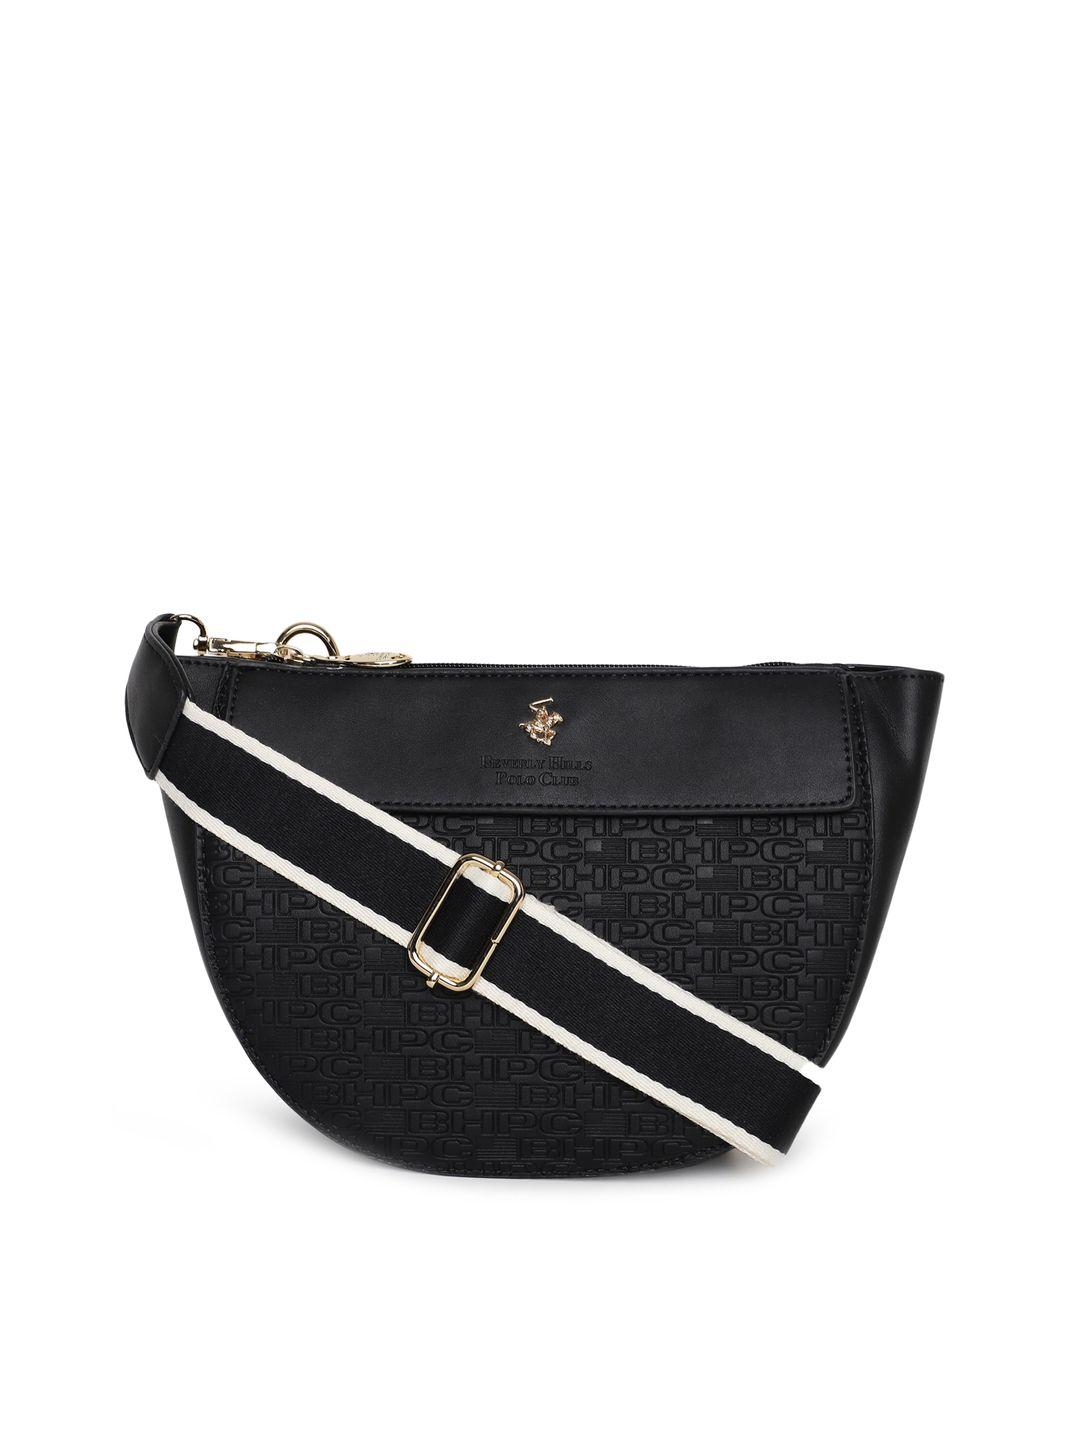 beverly hills polo club structured sling bag